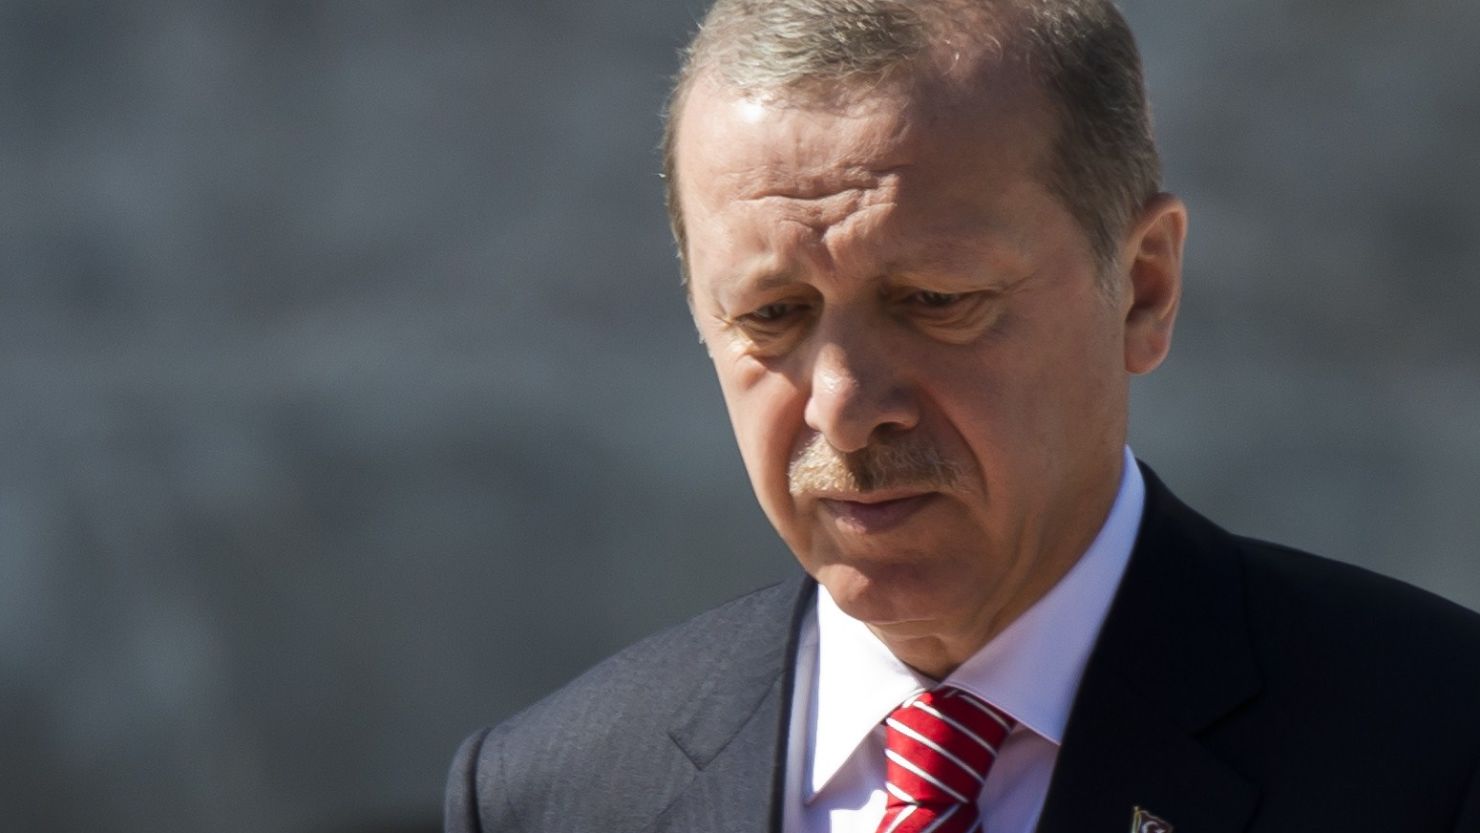 Turkish President Recep Tayyip Erogan has called for new elections.